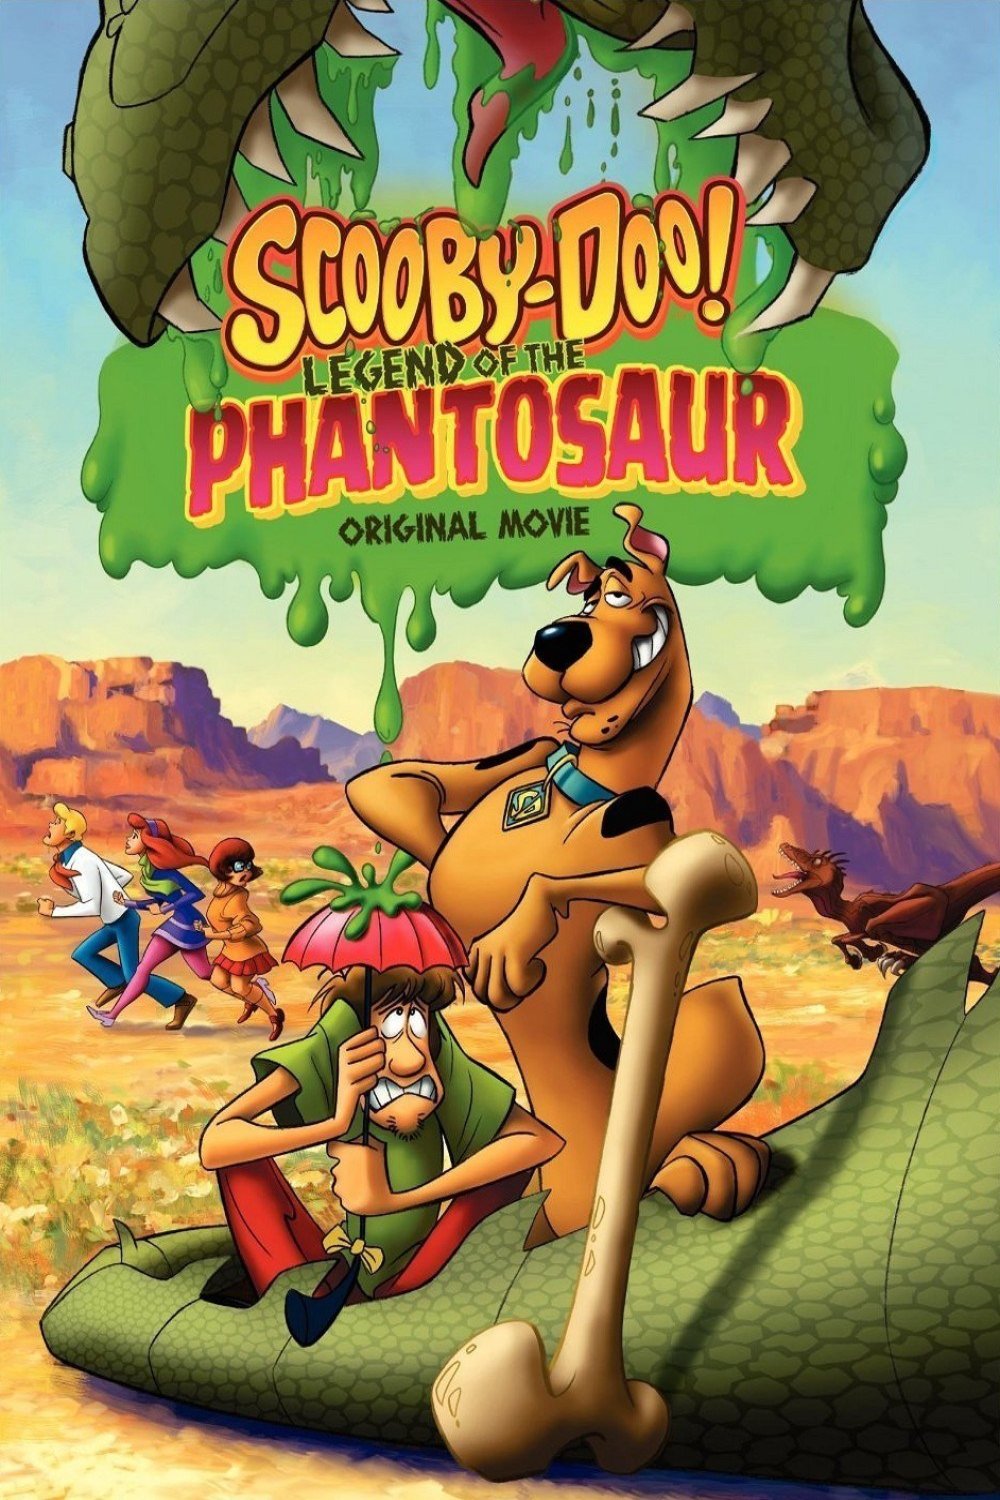 Poster of the movie Scooby-Doo! Legend of the Phantosaur